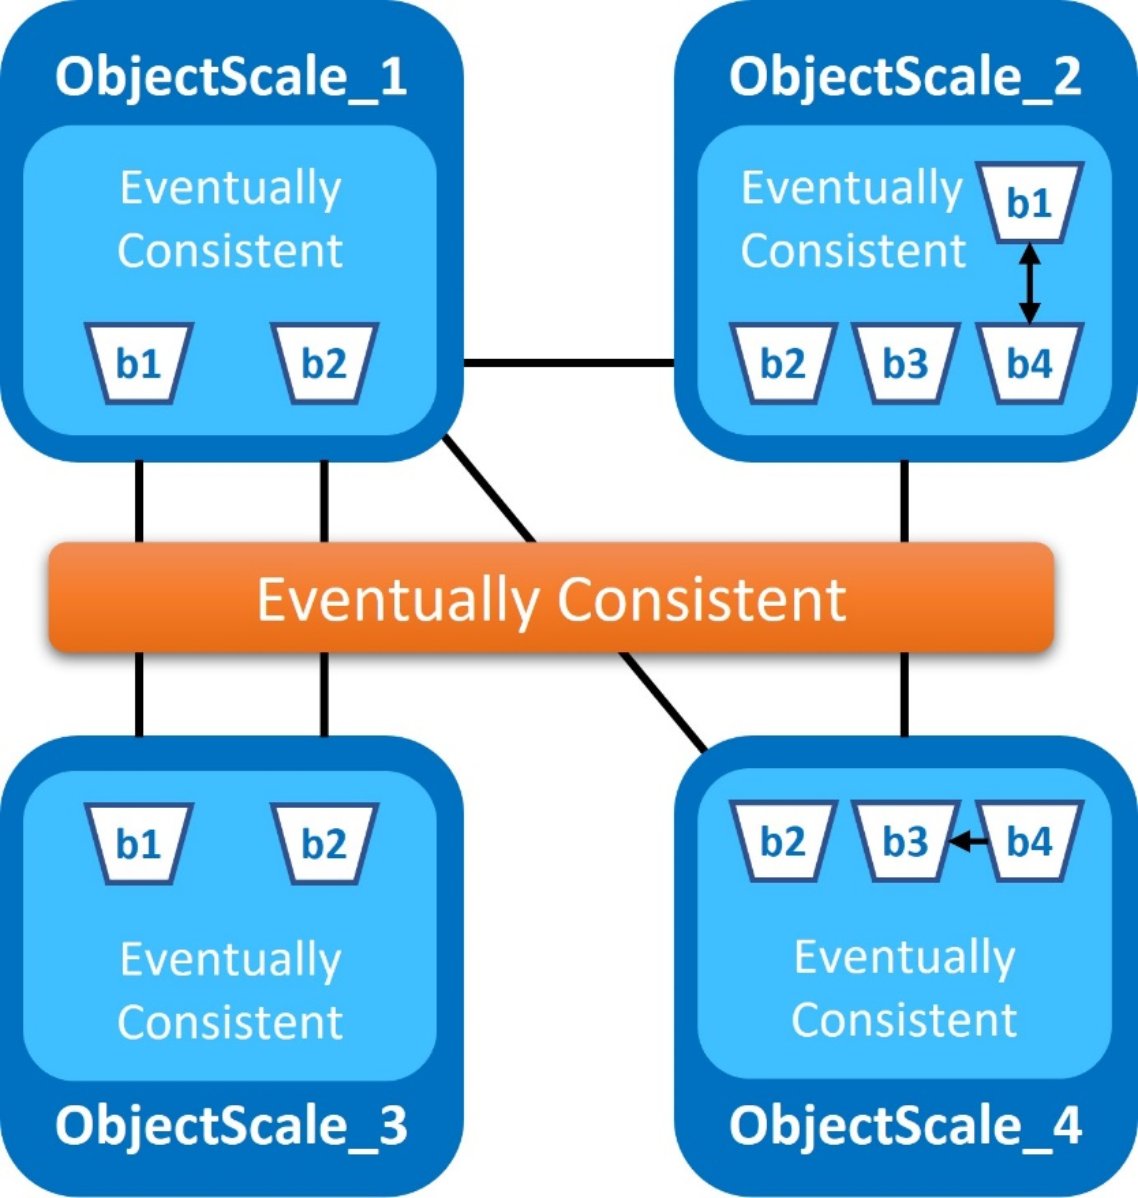 A logical diagram illustrating the eventual consistency model for ObjectScale replication between source and destination buckets.